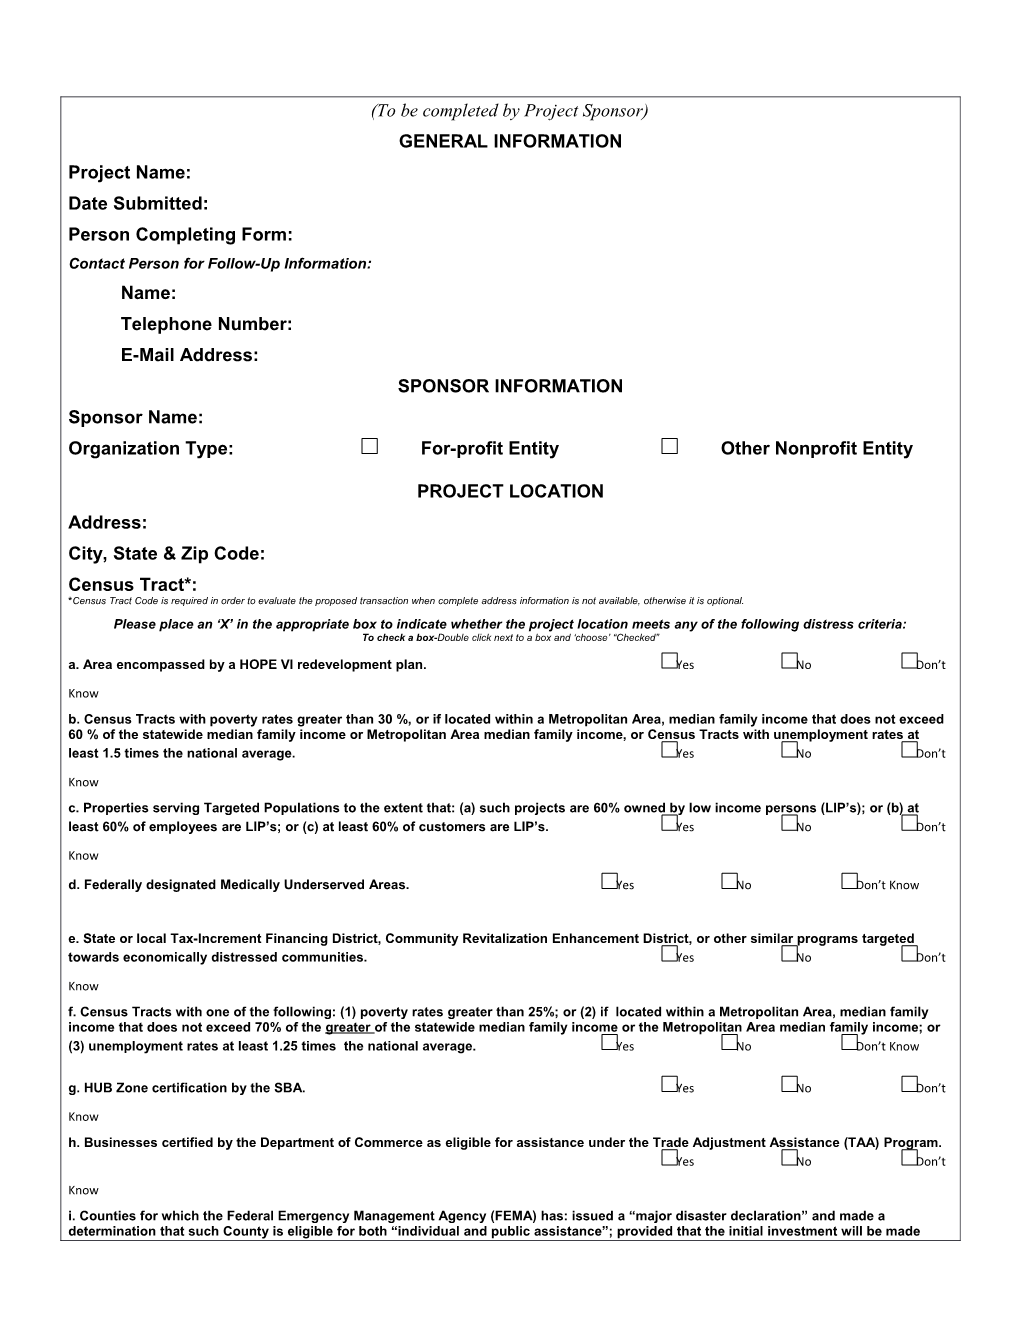 City of Indianapolis New Markets Tax Creditspre-Application Intakeform Page 1 of 6